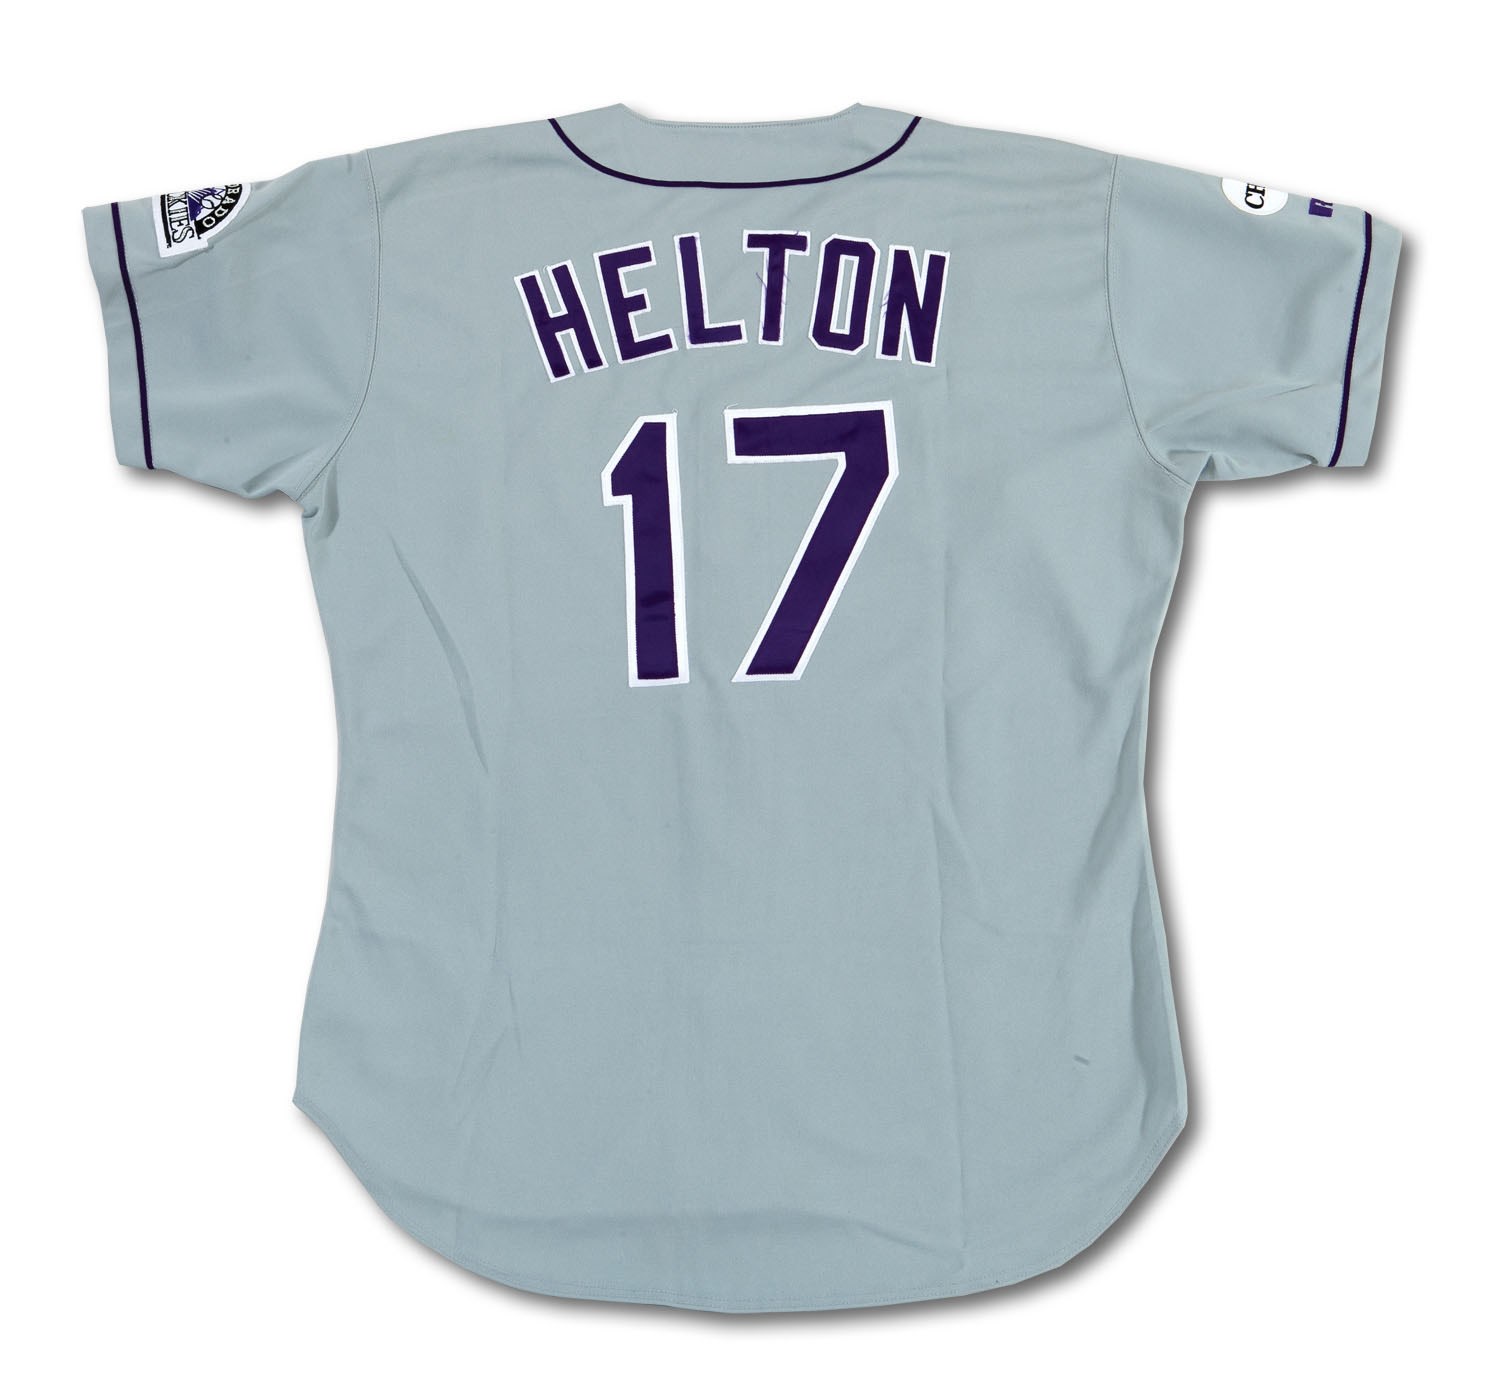 Todd Helton Autographed Jerseys, Signed Todd Helton Inscripted Jerseys